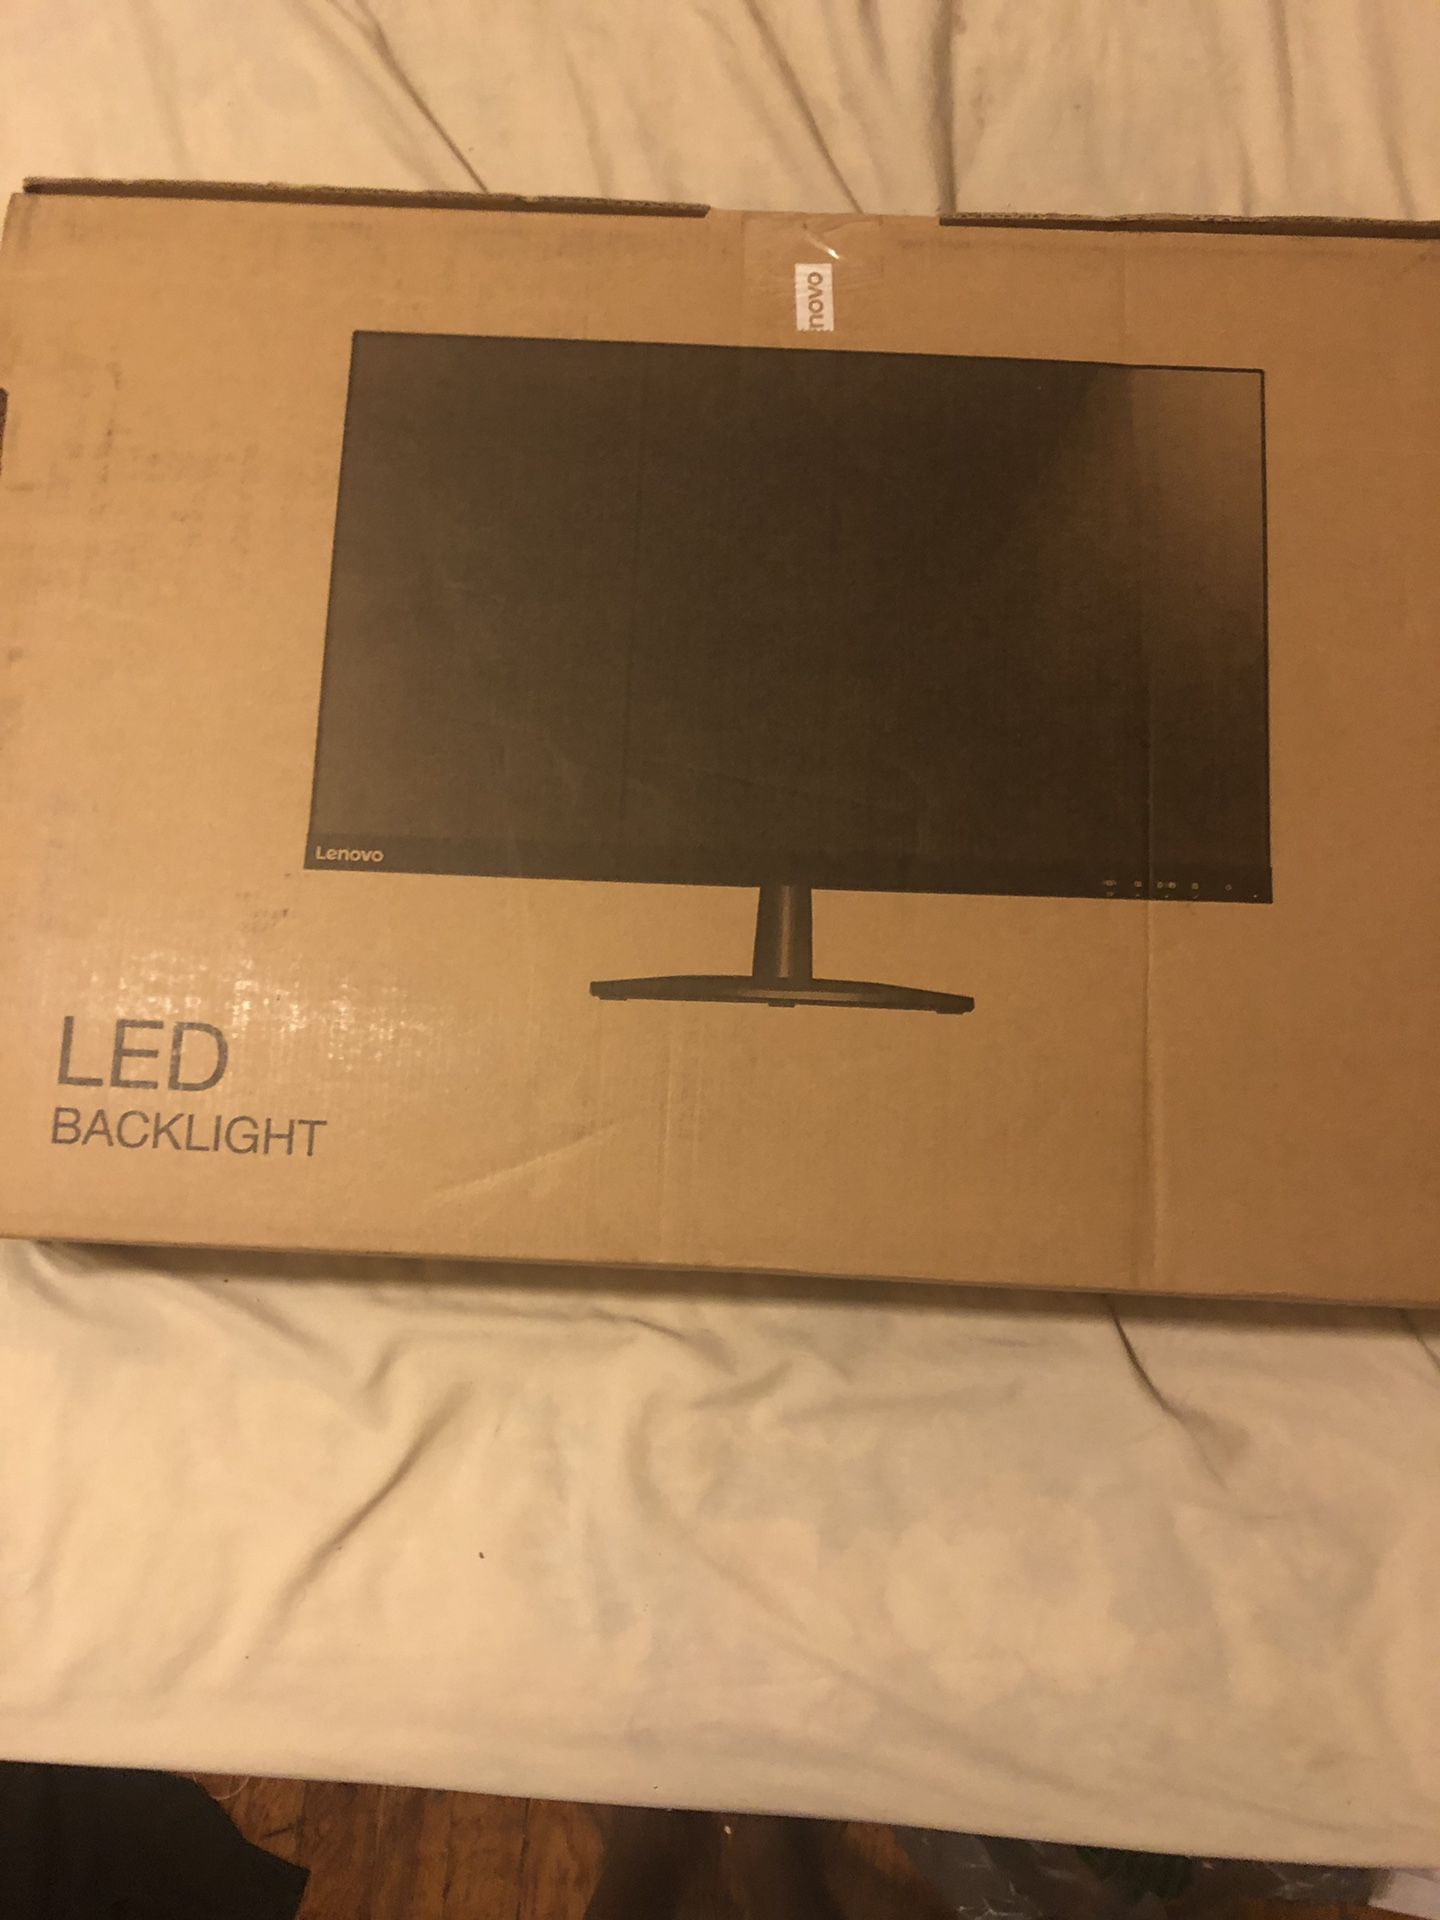 Lenovo 27” Monitor with wireless keyboard and mouse